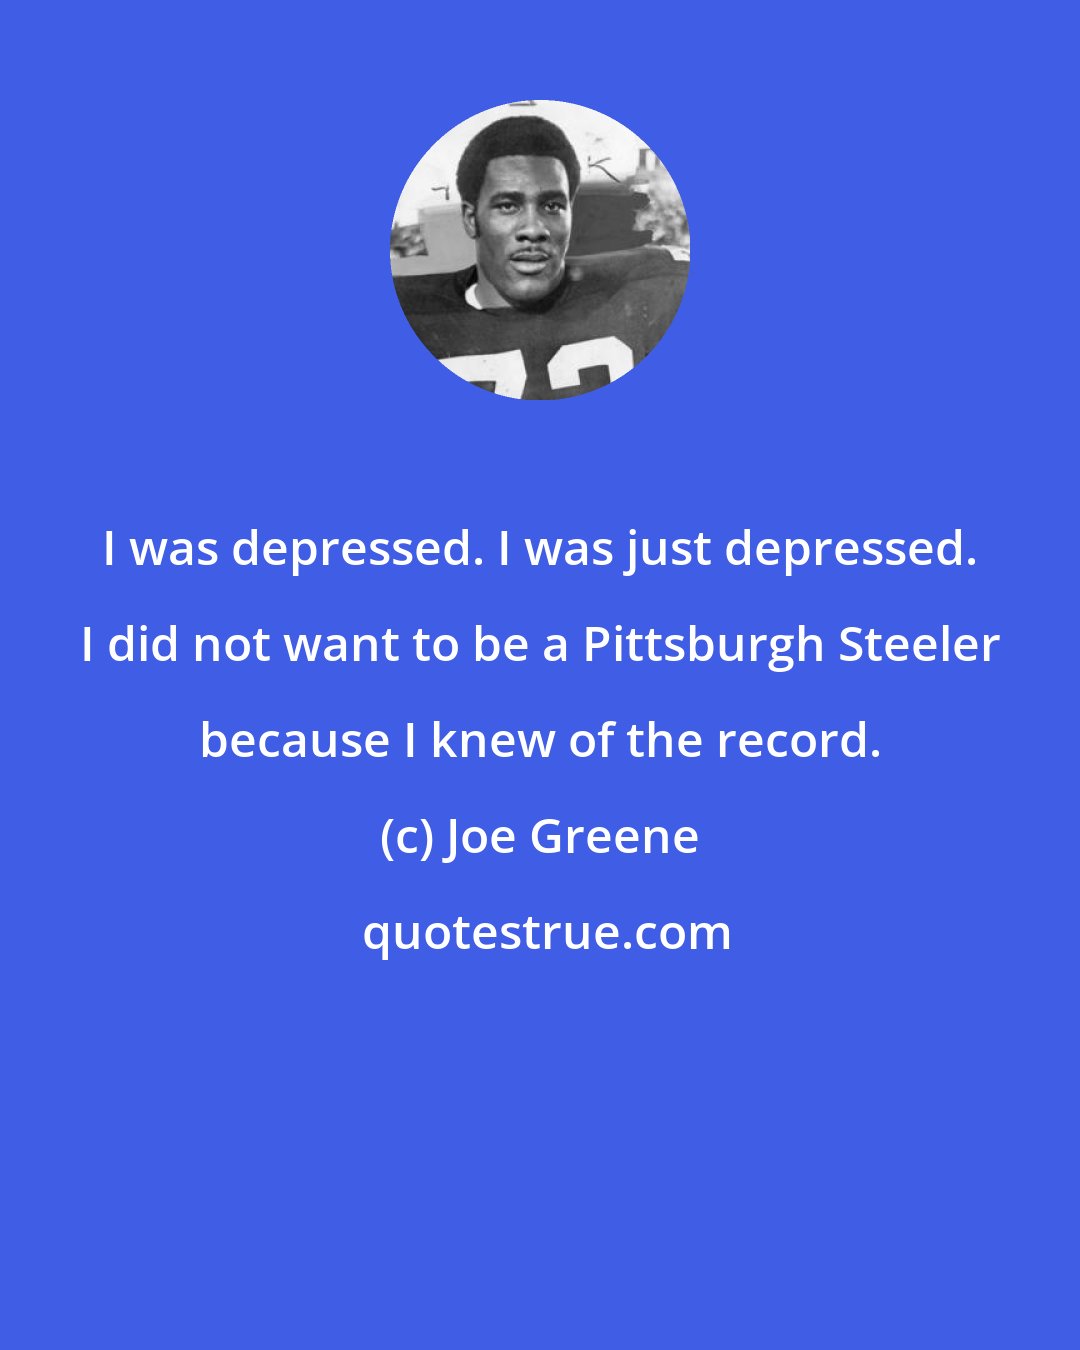 Joe Greene: I was depressed. I was just depressed. I did not want to be a Pittsburgh Steeler because I knew of the record.